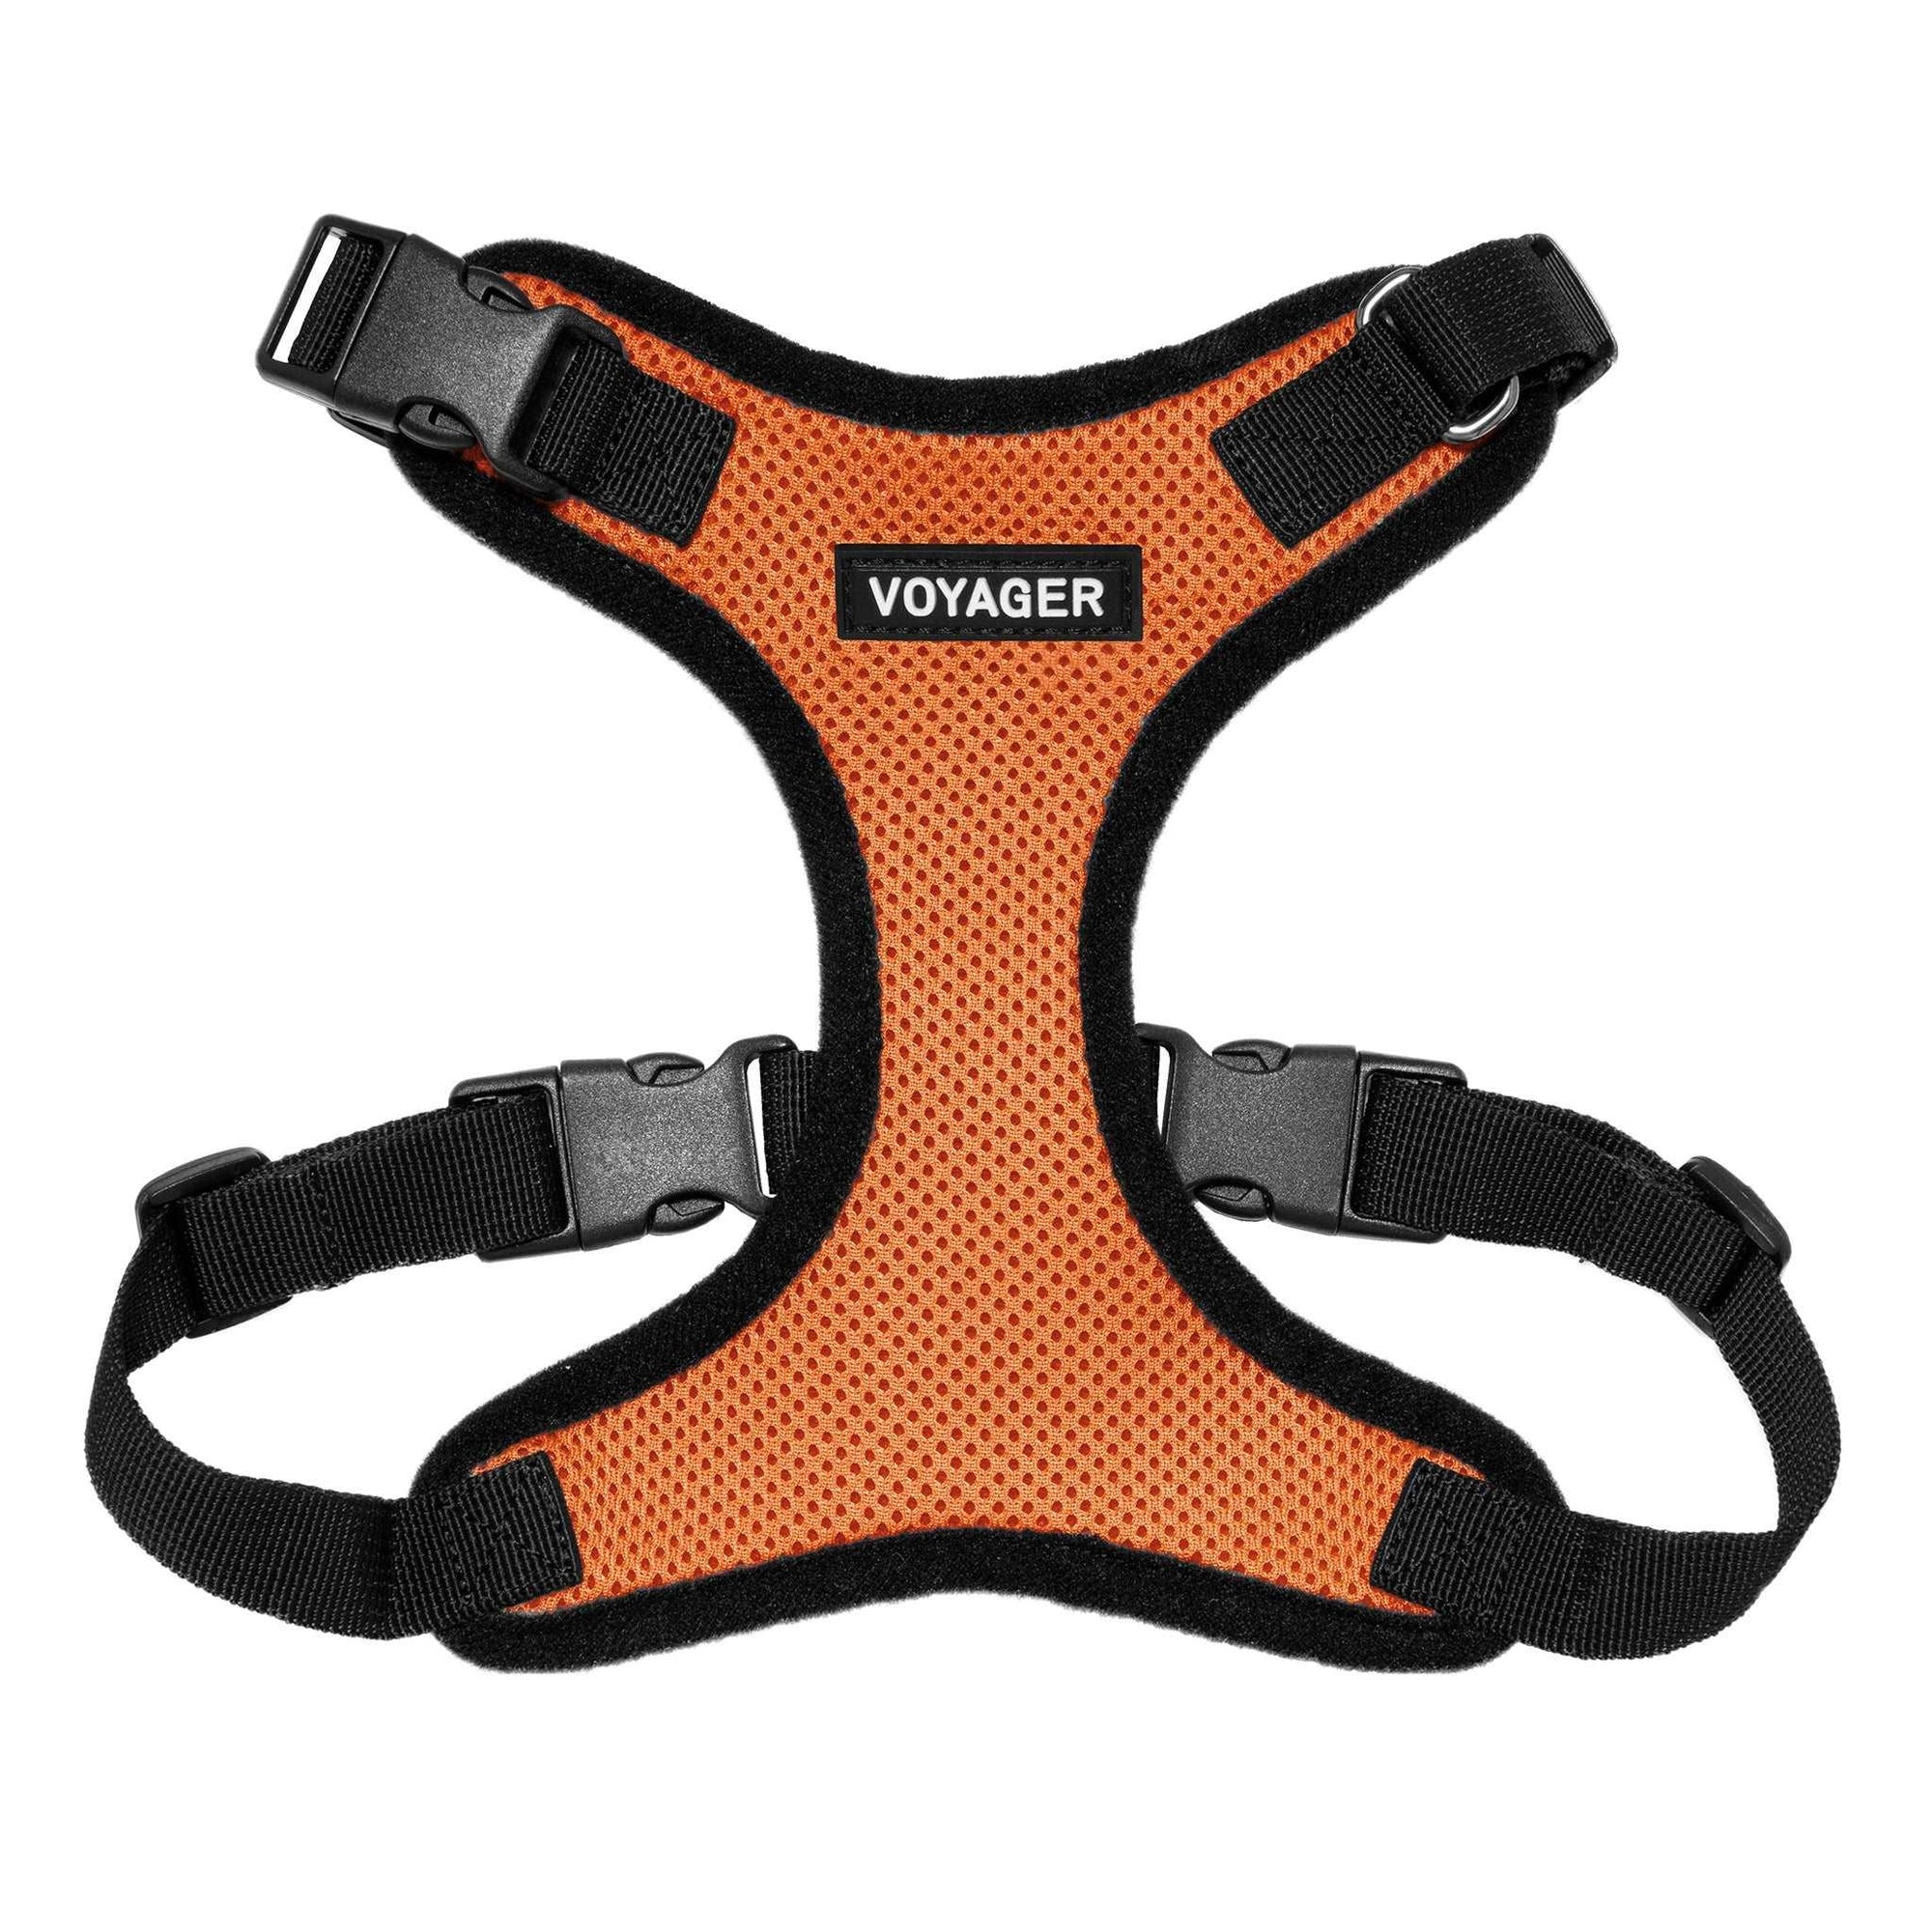 VOYAGER Step-In Lock Dog Harness in Orange with Black Trim and Webbing - Front